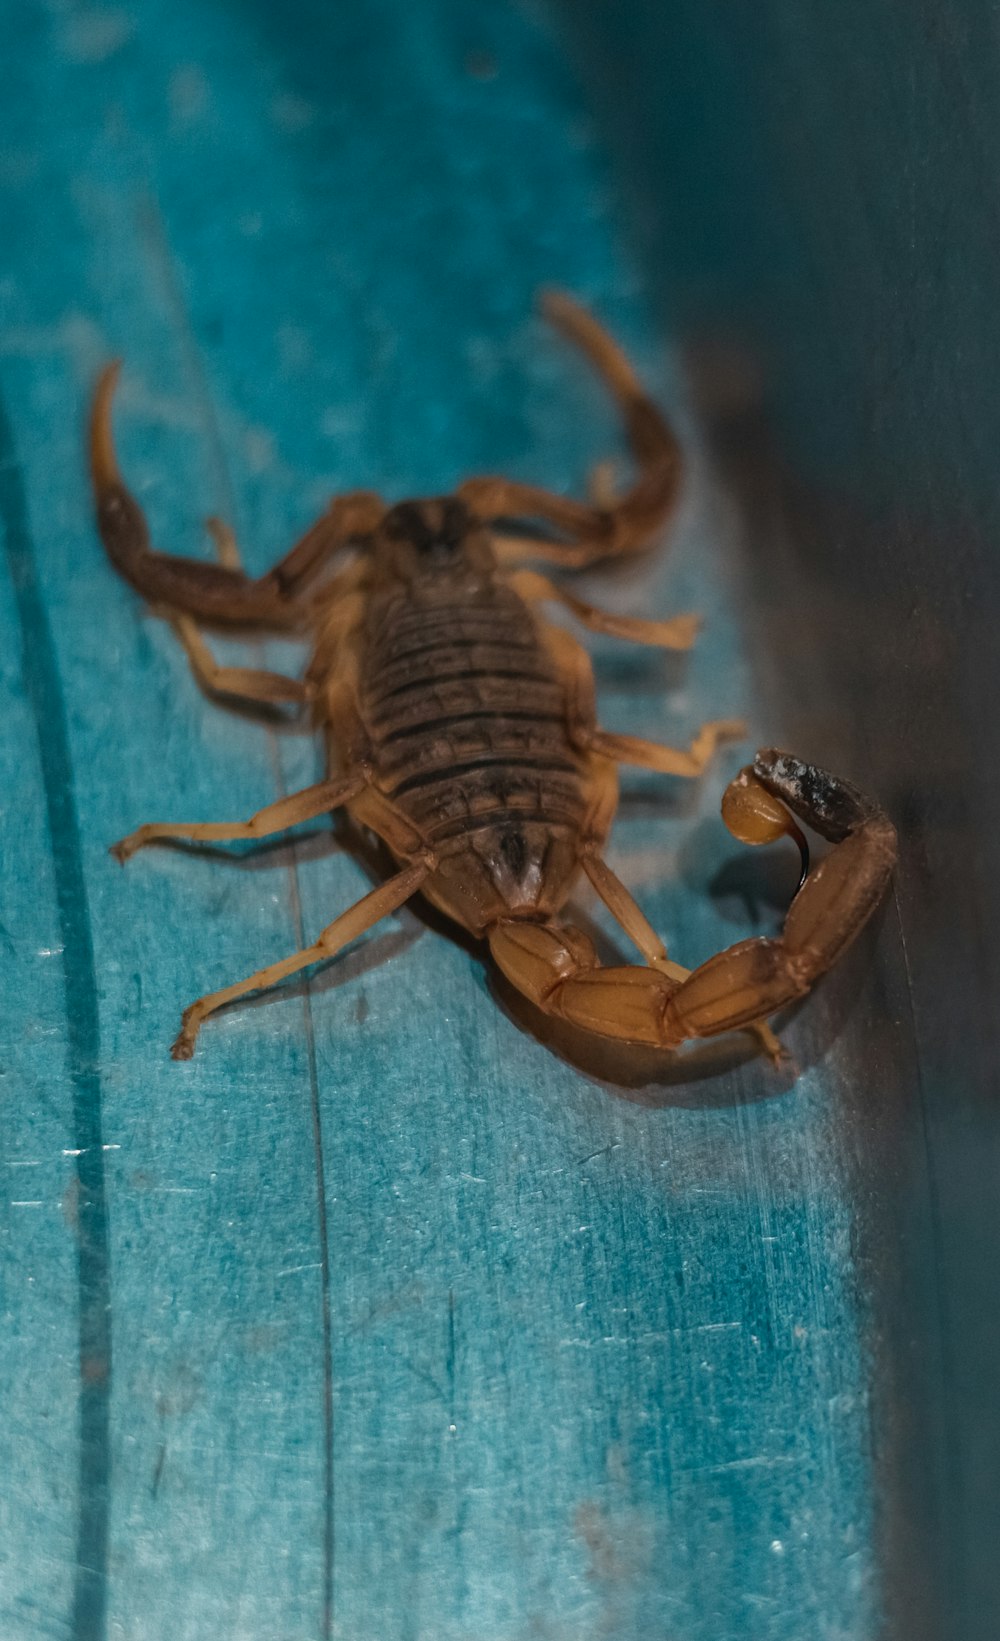 a close up of a scorpion on a blue surface